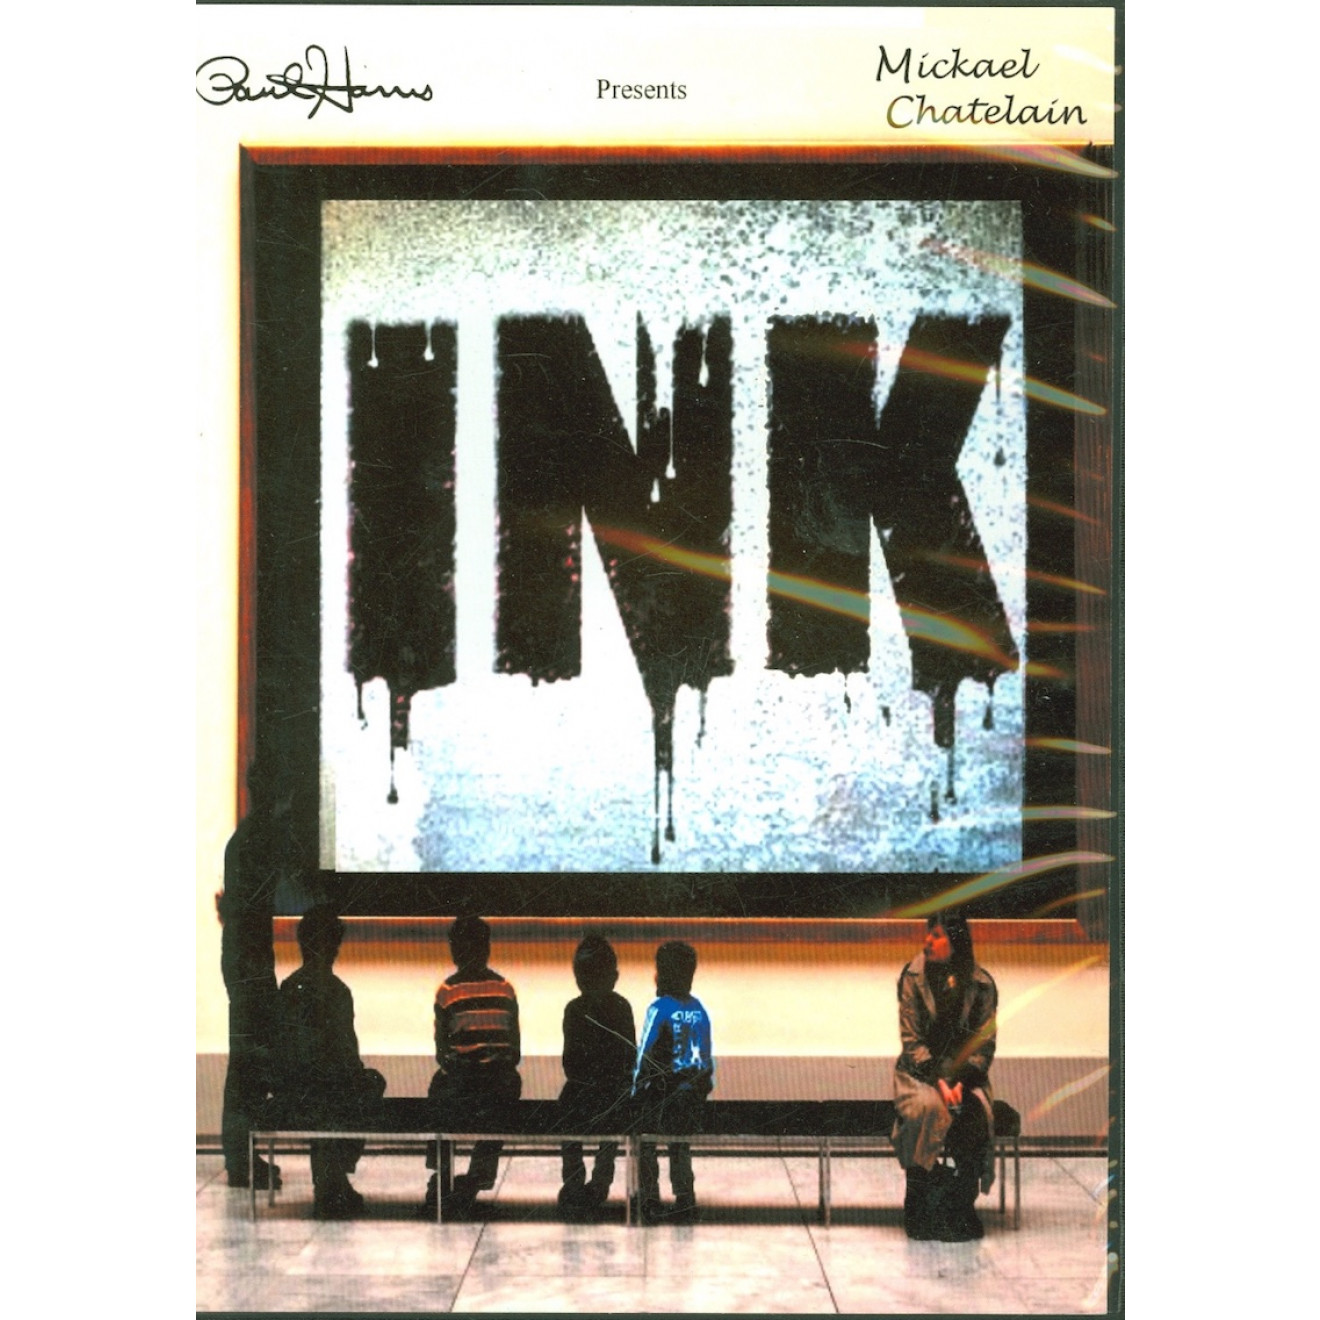 Ink (Gimmick and DVD) by Mickael Chatelain and Paul Harris - DVD (Sharpie)